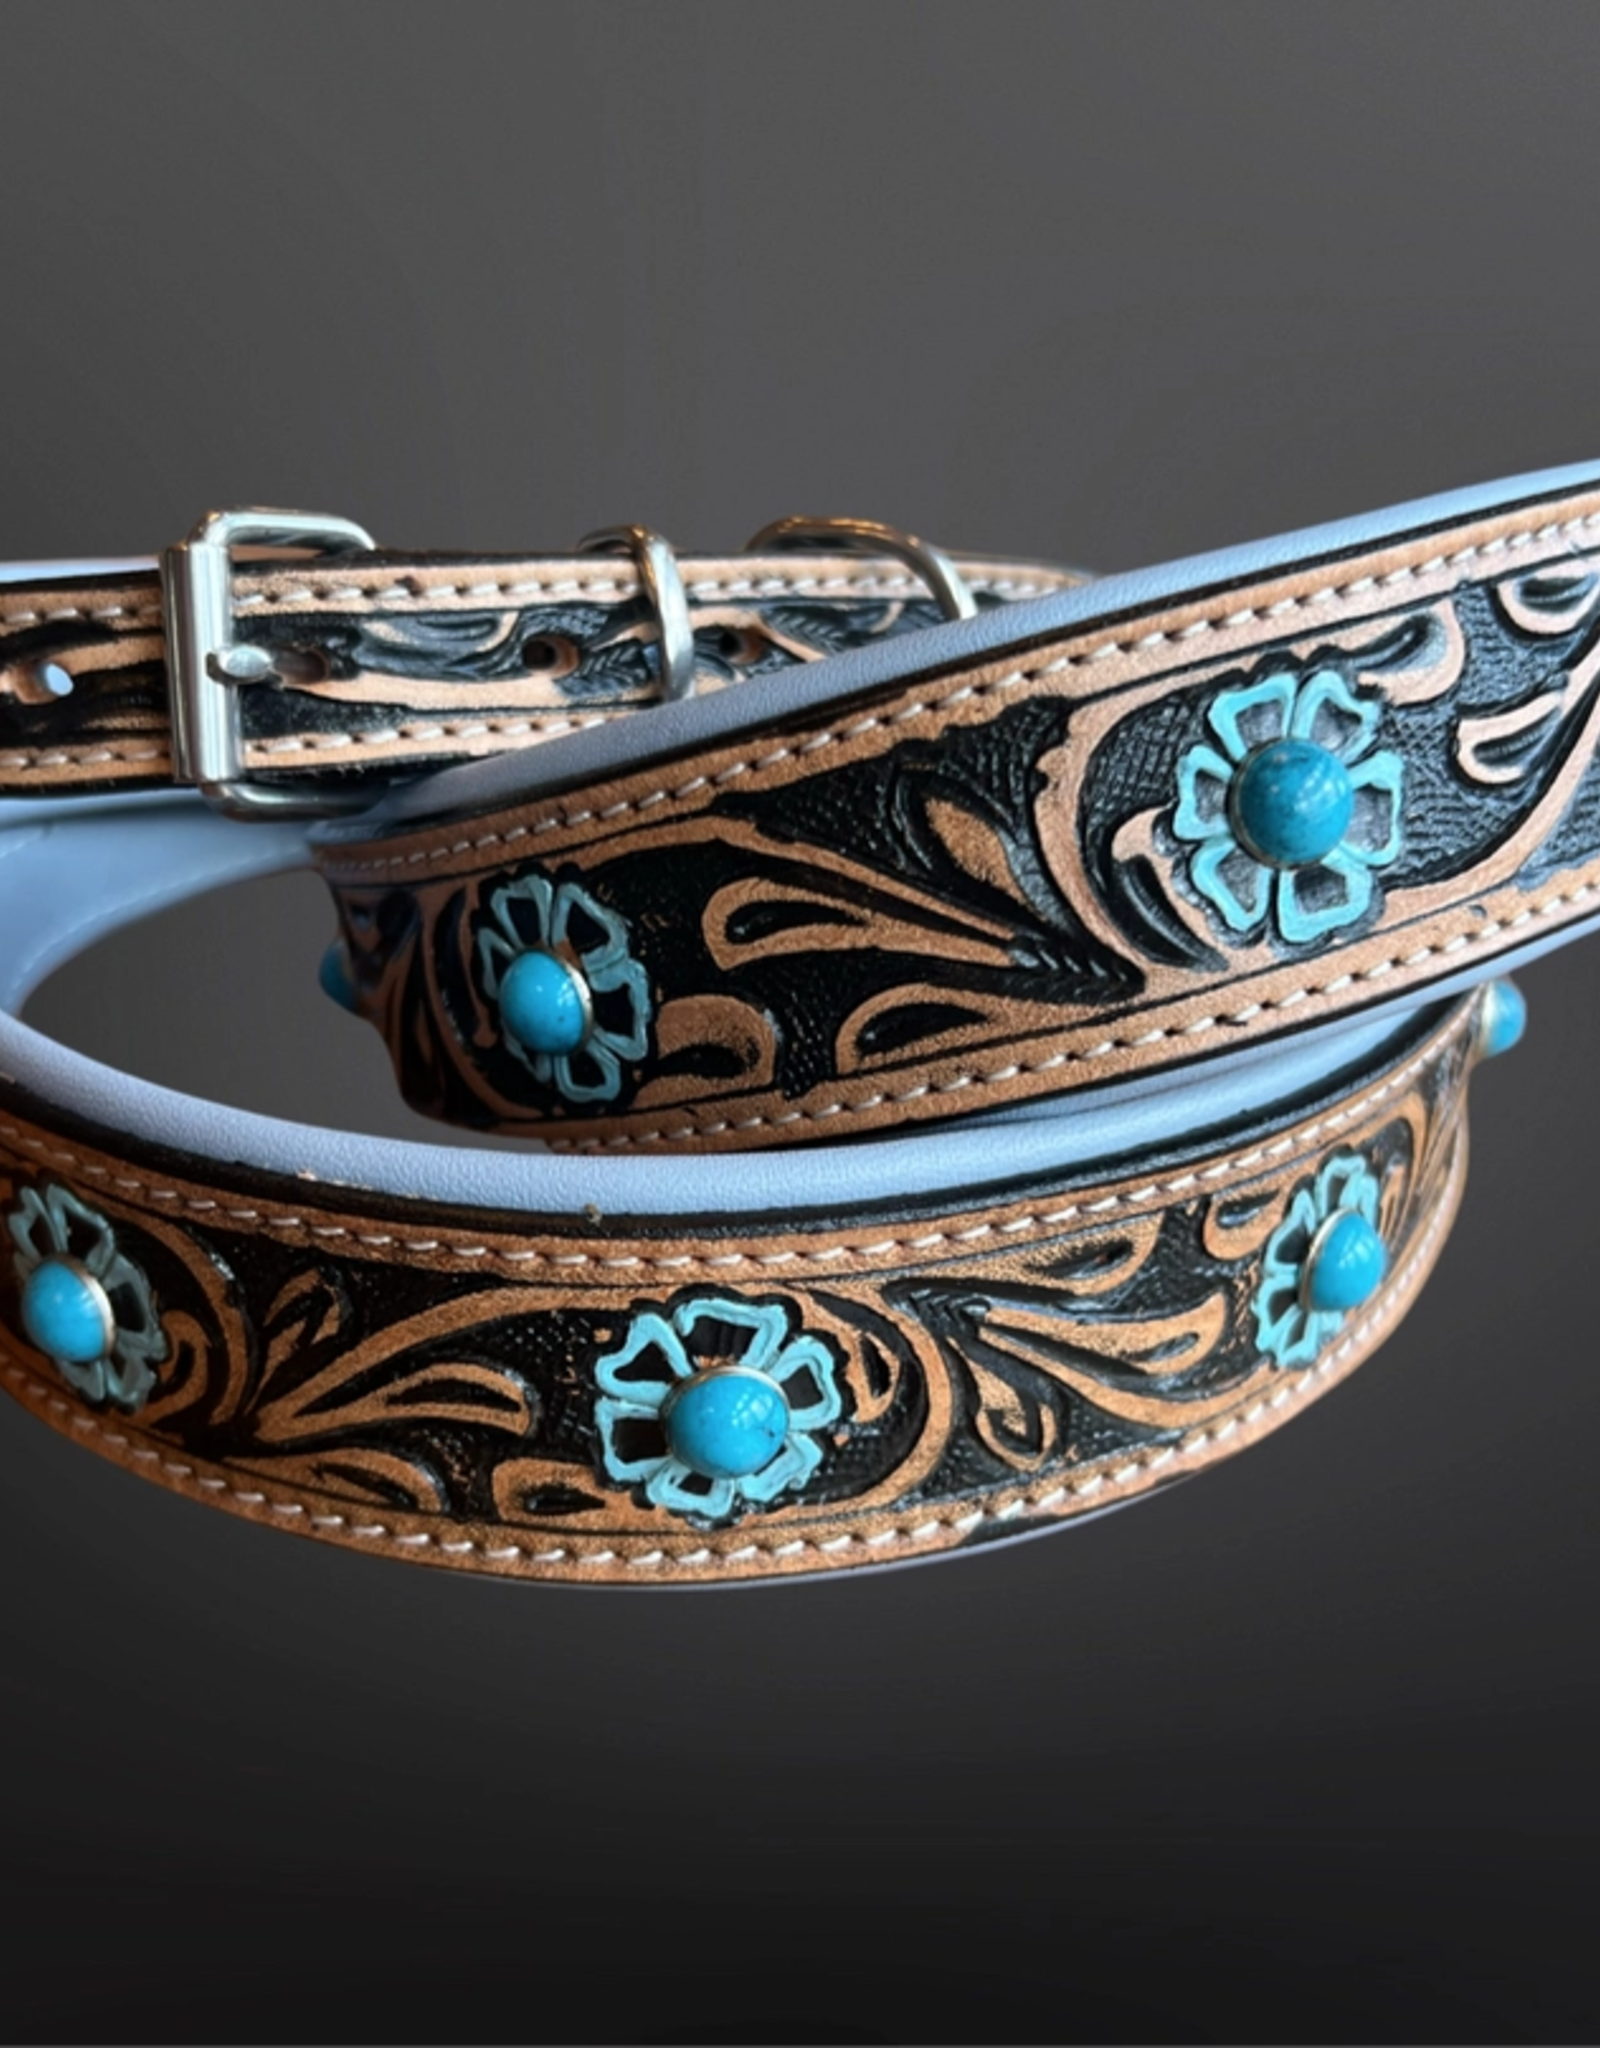 EQUIPAGE DOG COLLAR TOOLED LEATHER W/ TUR CONCHOS